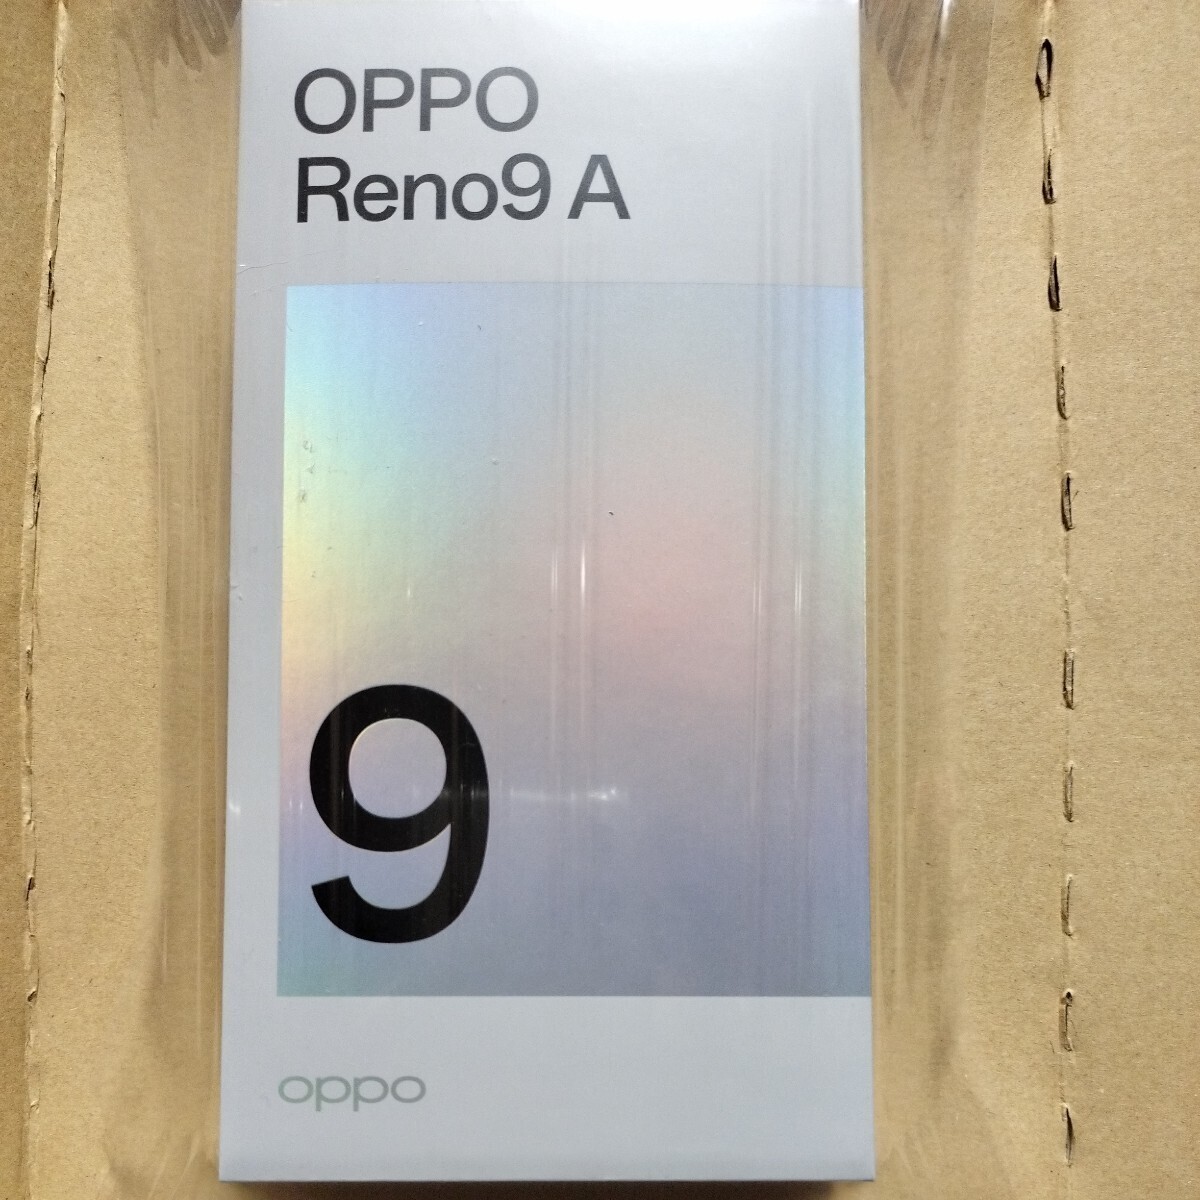  new goods unopened OPPO Reno9 A body Night black Ymobile version Y!mobile version Reno9A smartphone Android